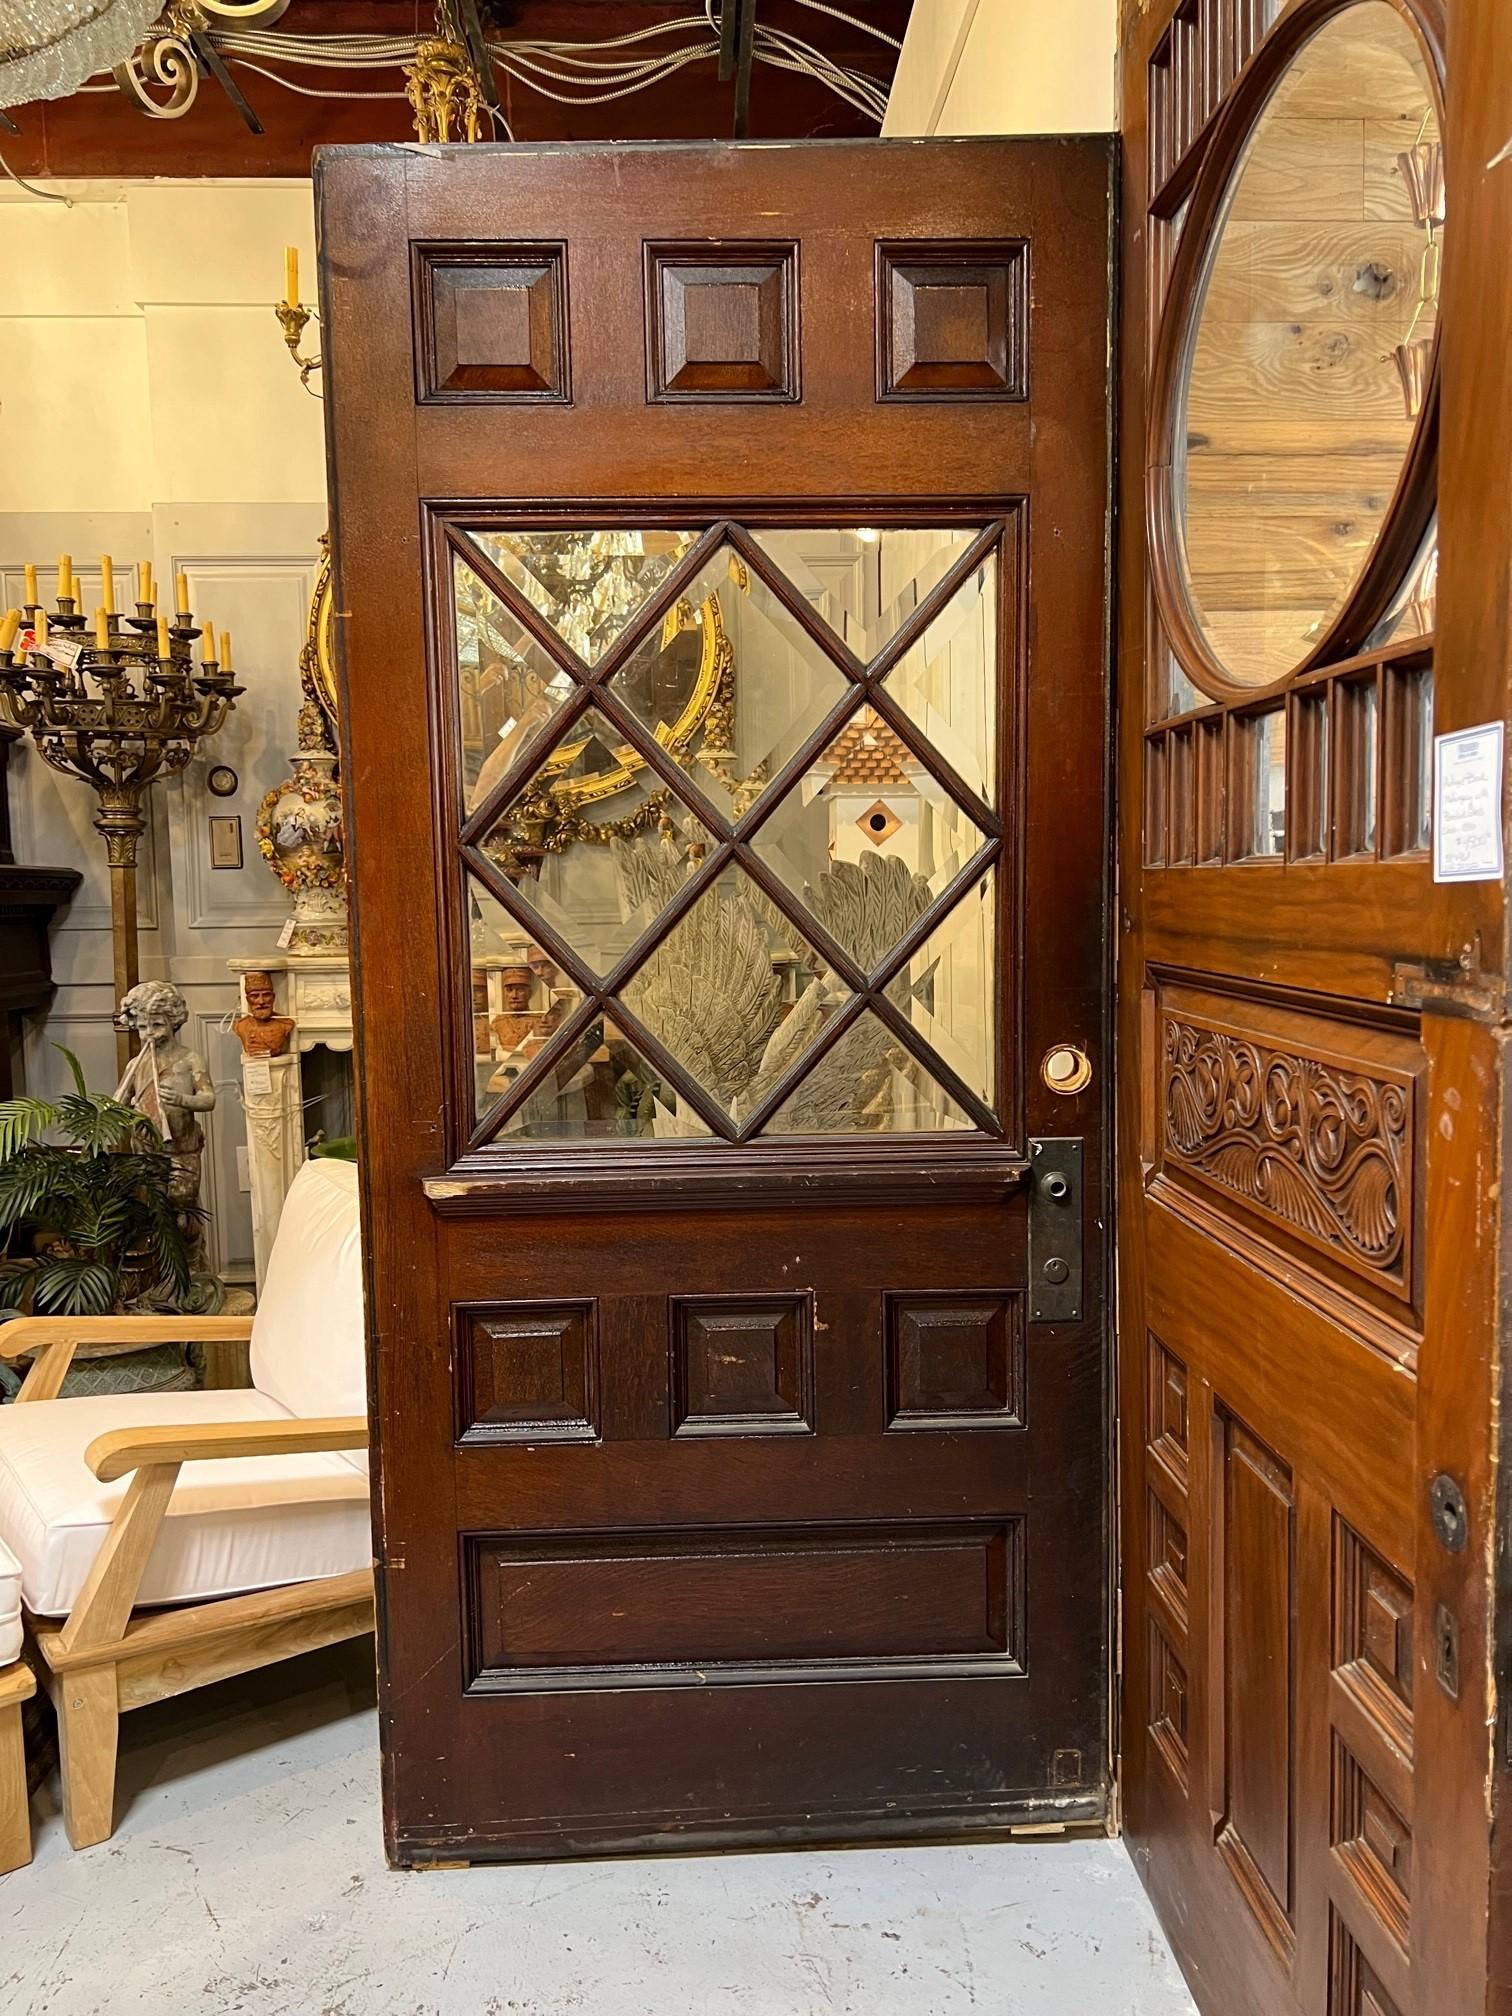 Beautiful antique oversized entrance door with diamond shape beveled glass panels and raised wood panels. This is a great door to be used as a front door or as a interior door sliding on a track between two rooms. What makes this door special is the